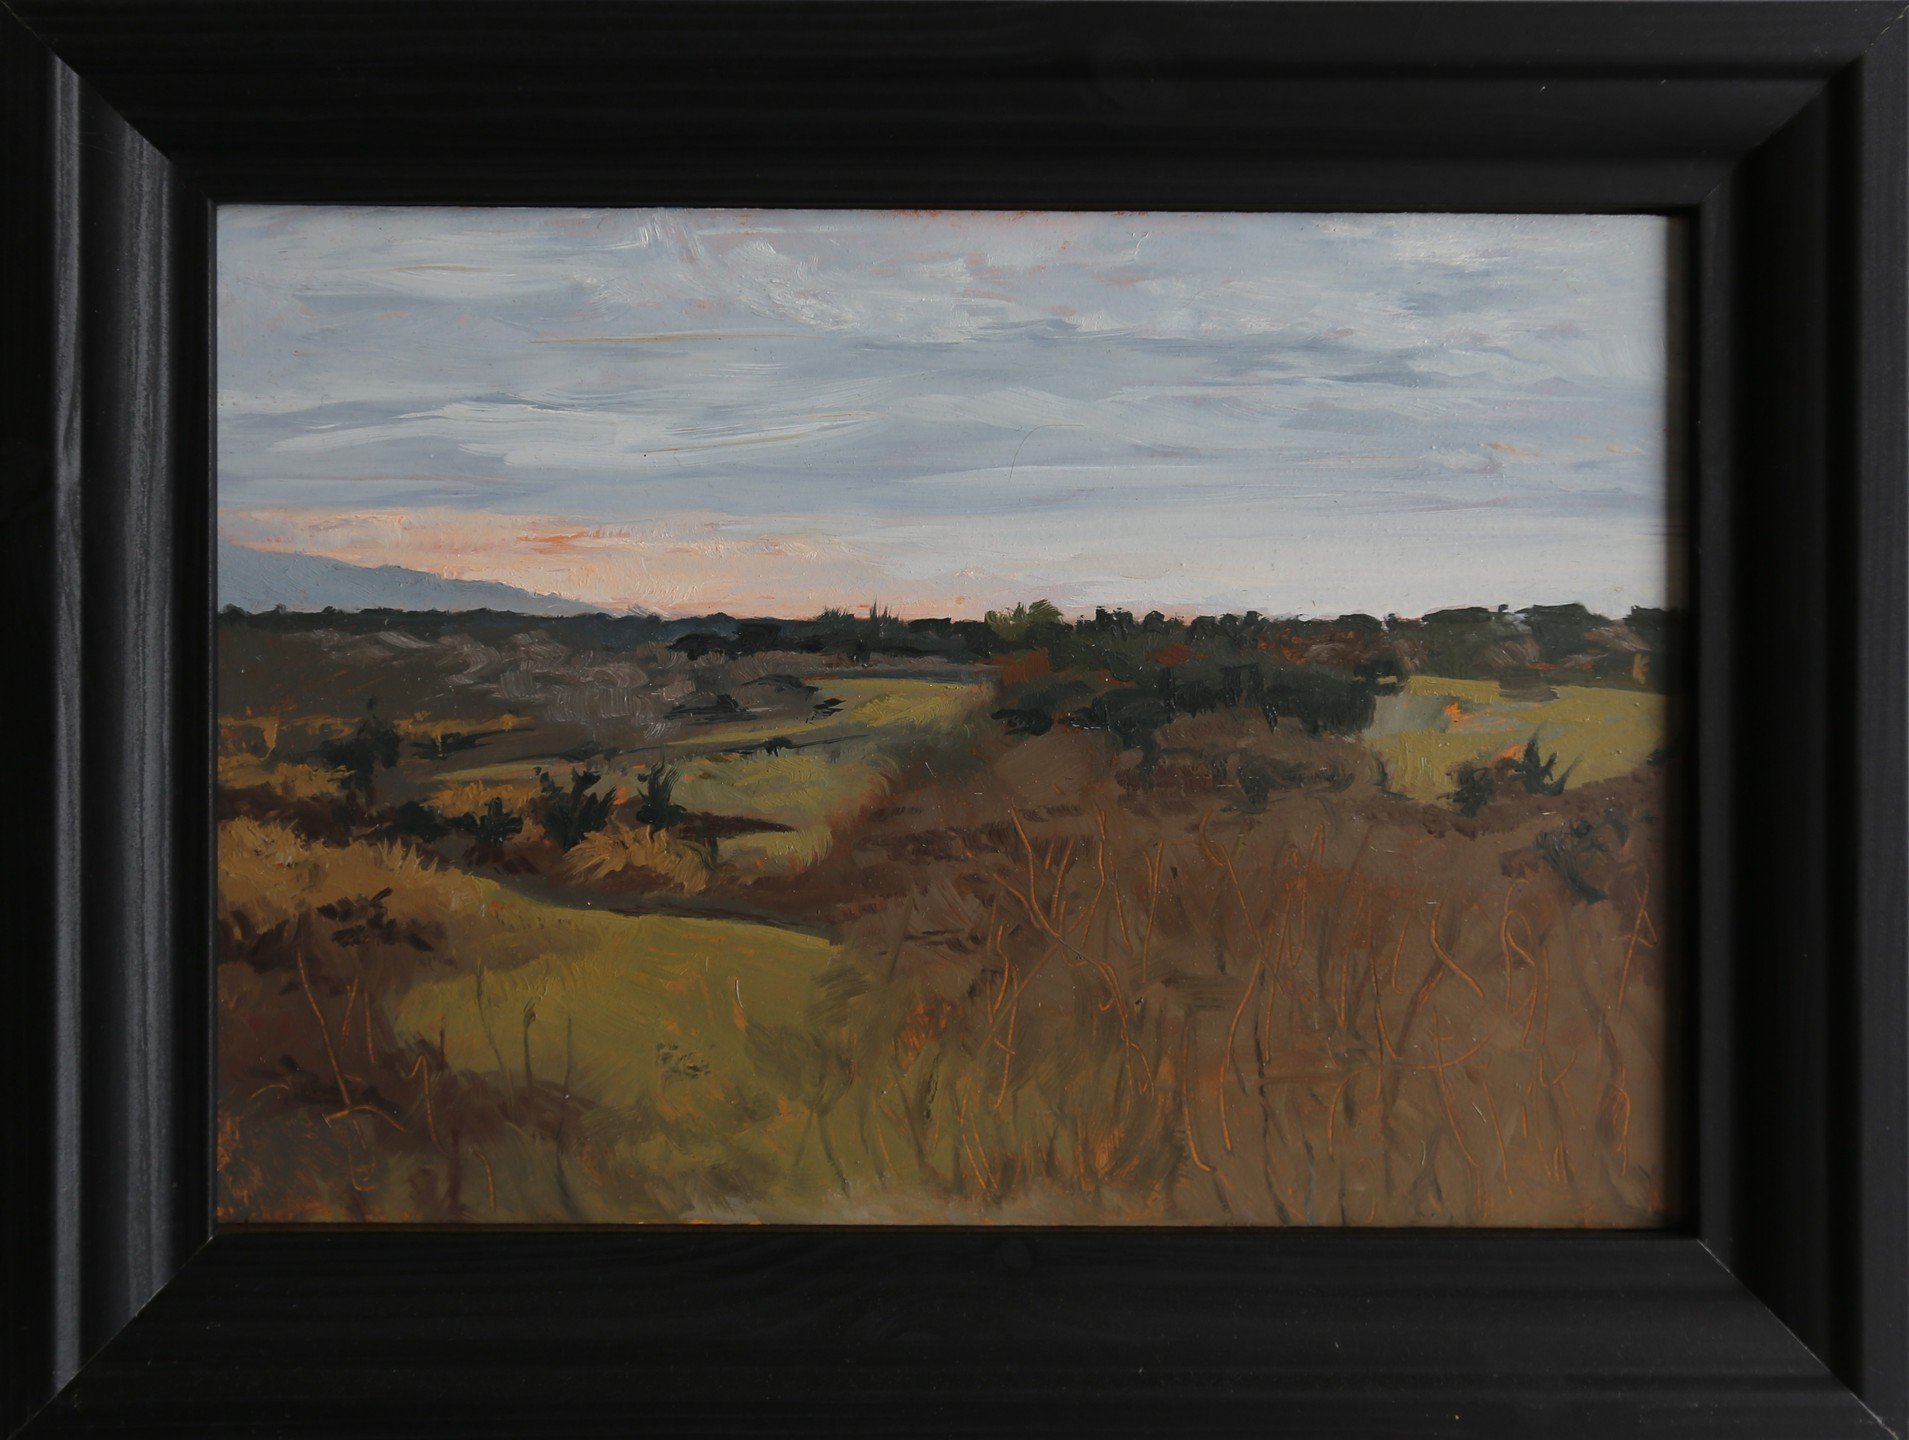 Studio sale painting 1. 
View over Parco Caffarella 2020, Rome, Italy. This is a plein air painting (done on location), done just before the covid lockdown. I was listening to Jethro Tull and loving life that morning. The wind was cold and there was 